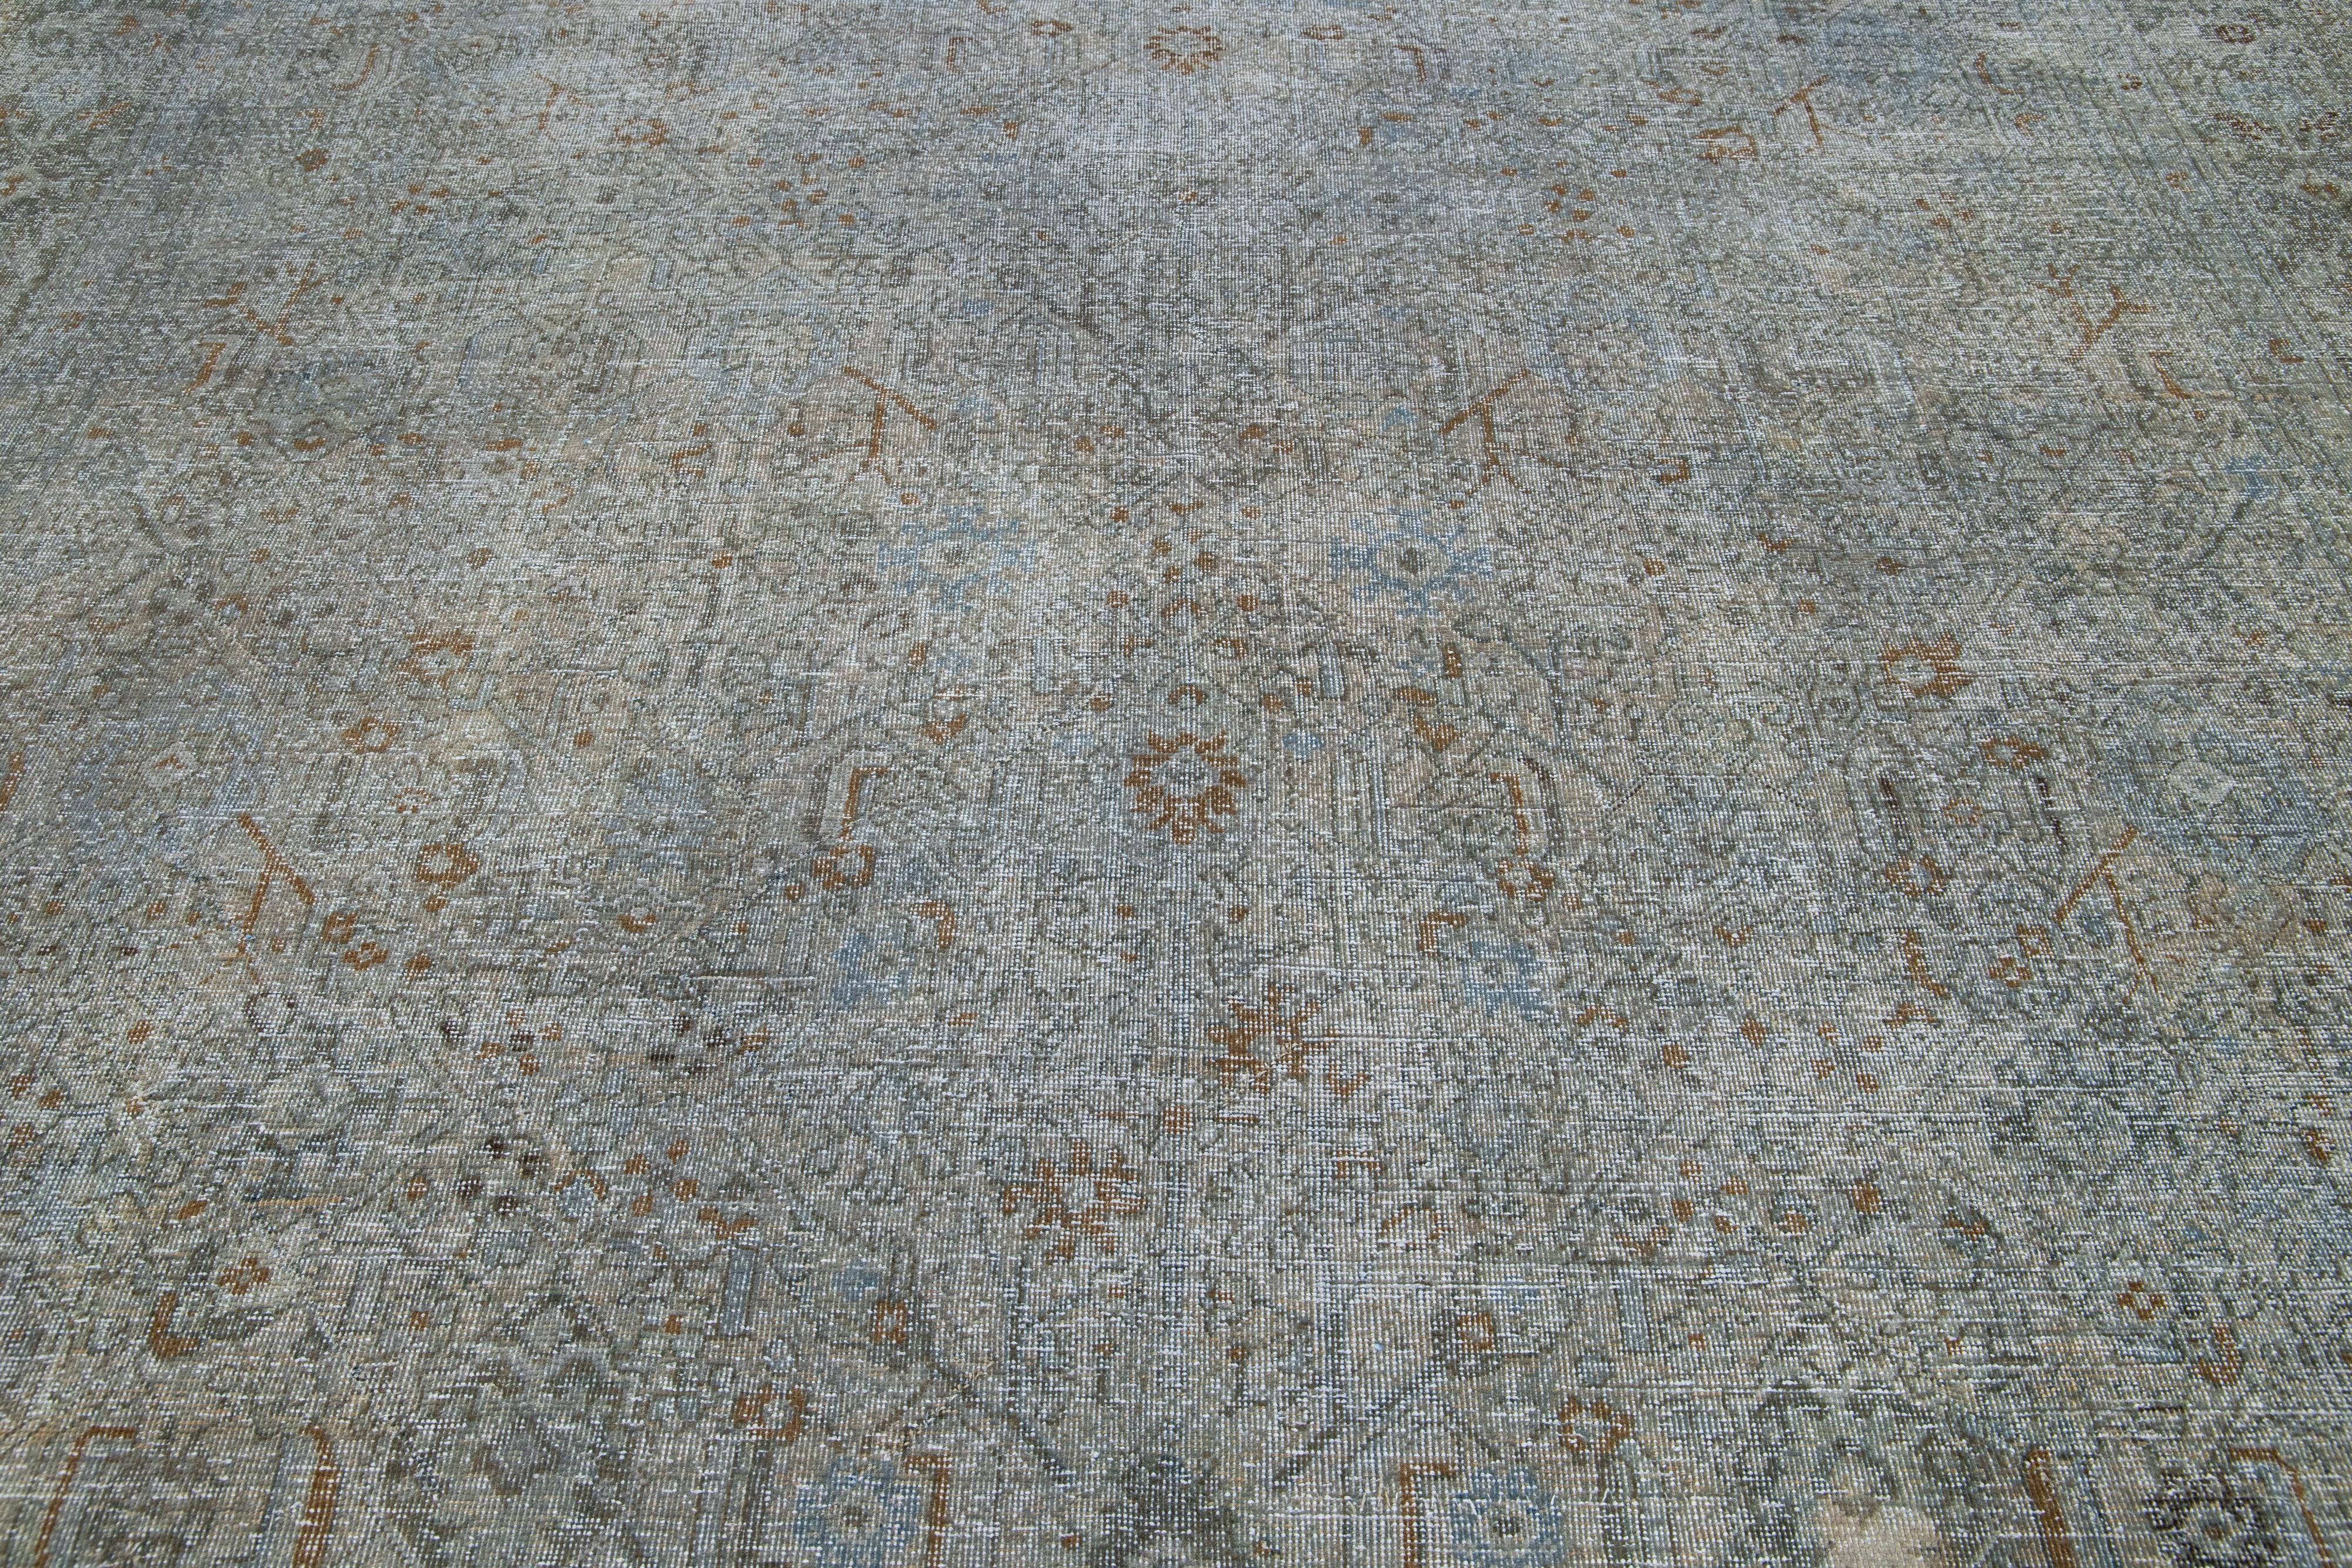 19th Century Antique Persian Tabriz Wool Rug with Allover Design In Gray For Sale 3